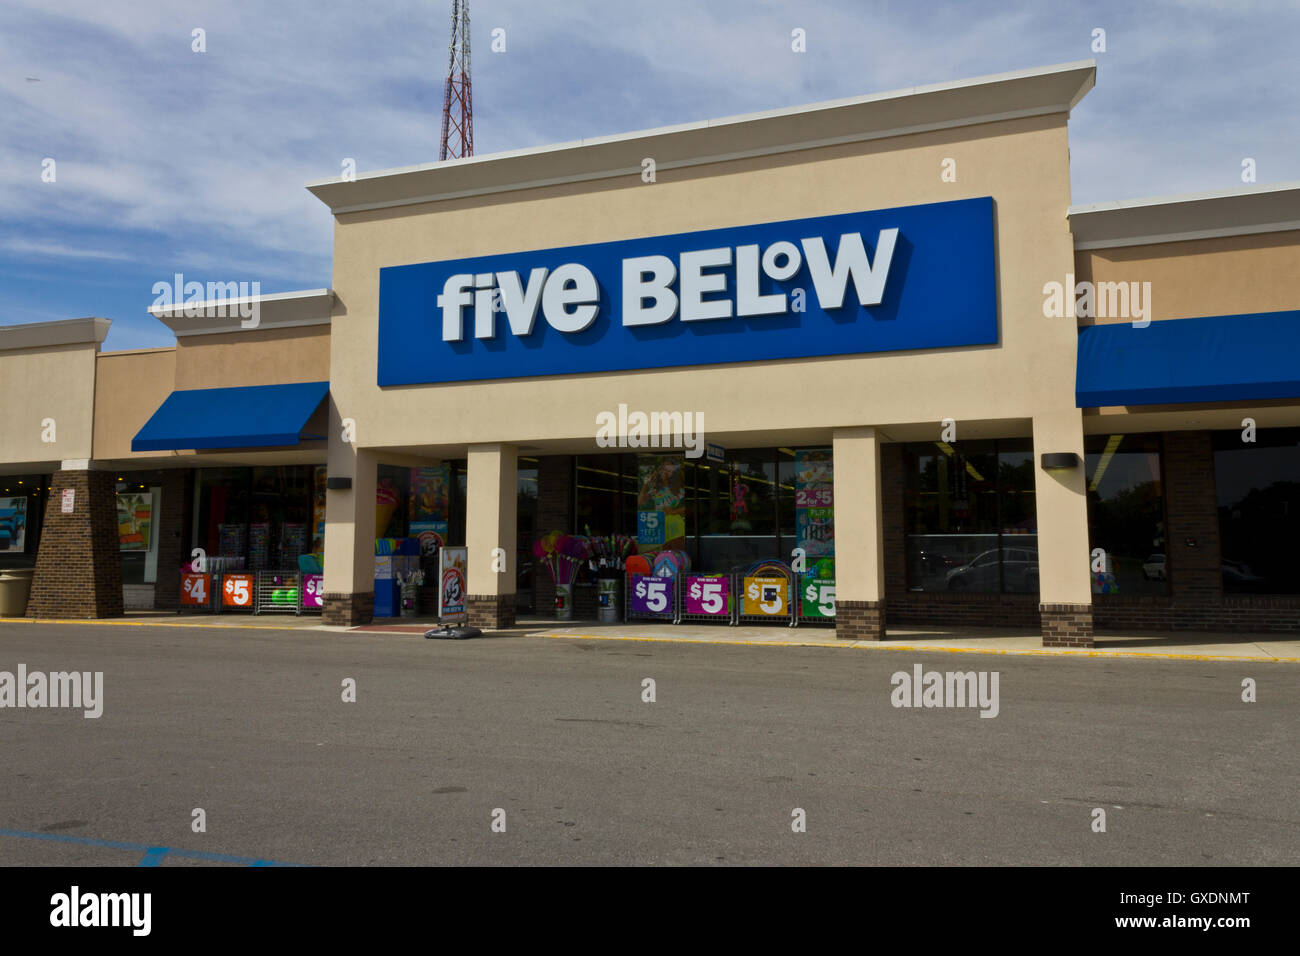 Indianapolis - Circa June 2016: Five Below Retail Store. Five Below is a chain that sells products that cost up to $5 V Stock Photo